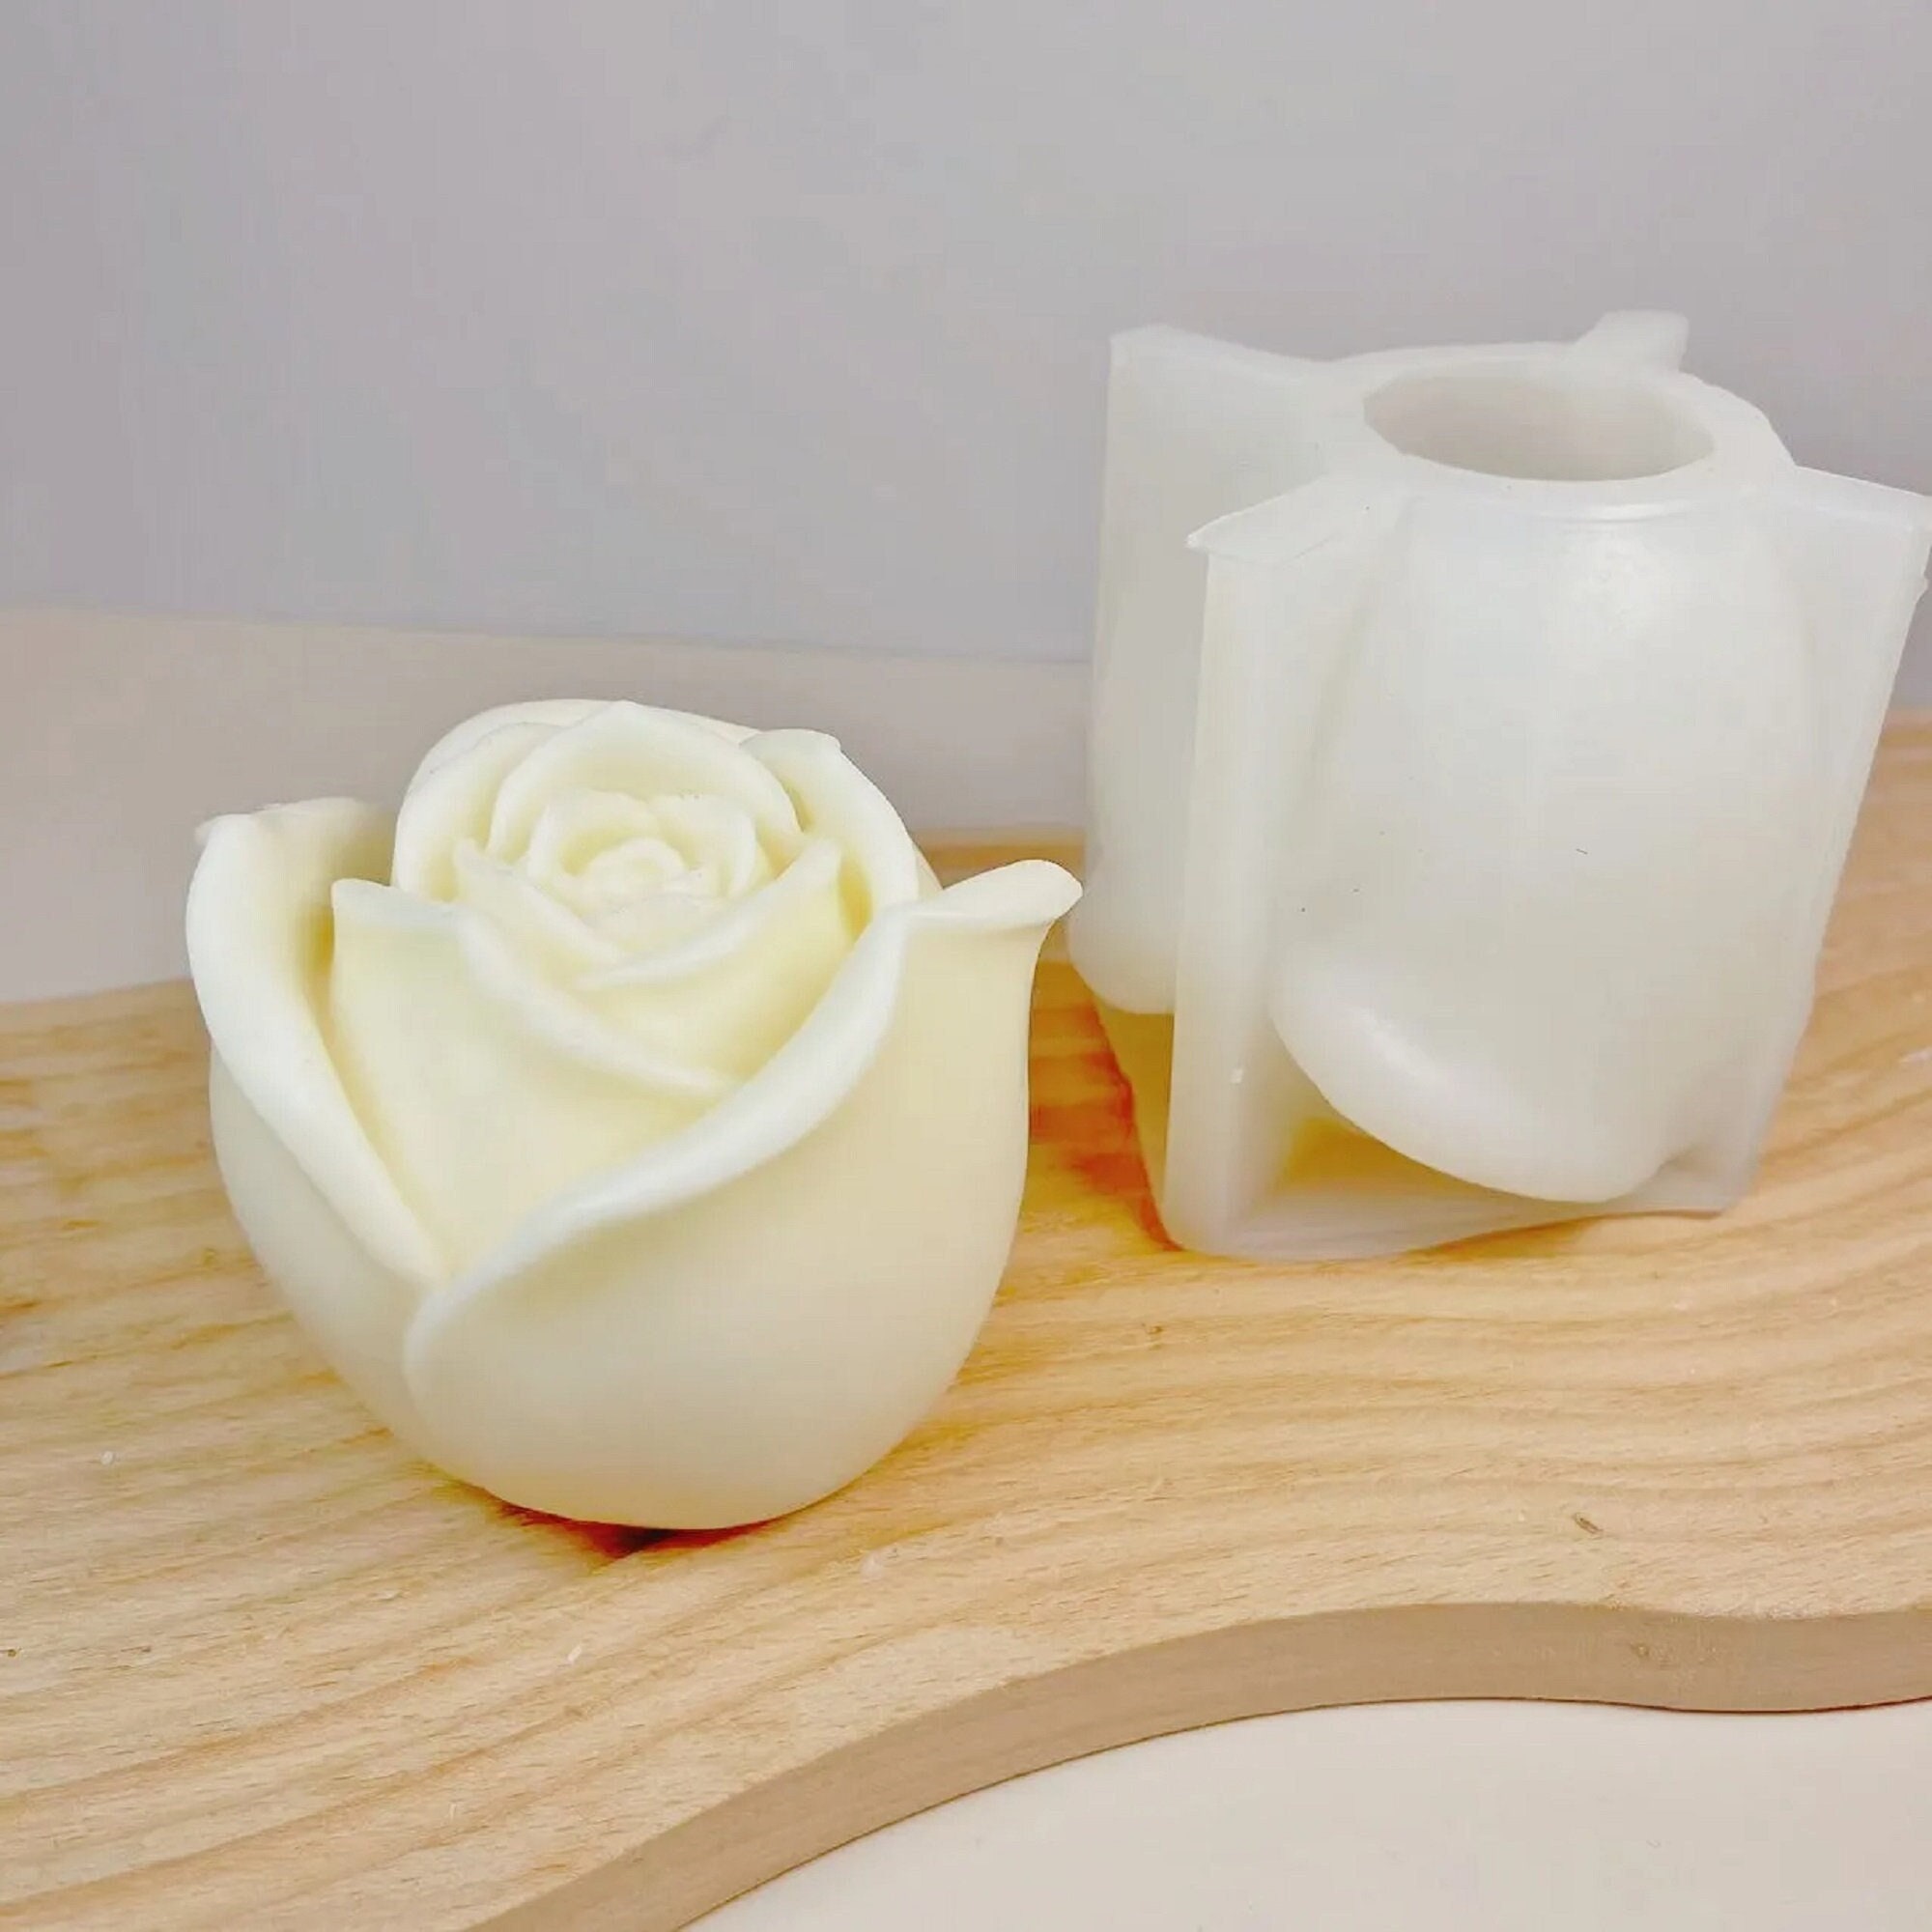 Heart Candle Mold, Rose Mold, Love Rose Candle Mold, Handmade Soap Mold,  Diffusion Cream DIY, Food Grade Silicone Mold, Valentine's Day Gift 